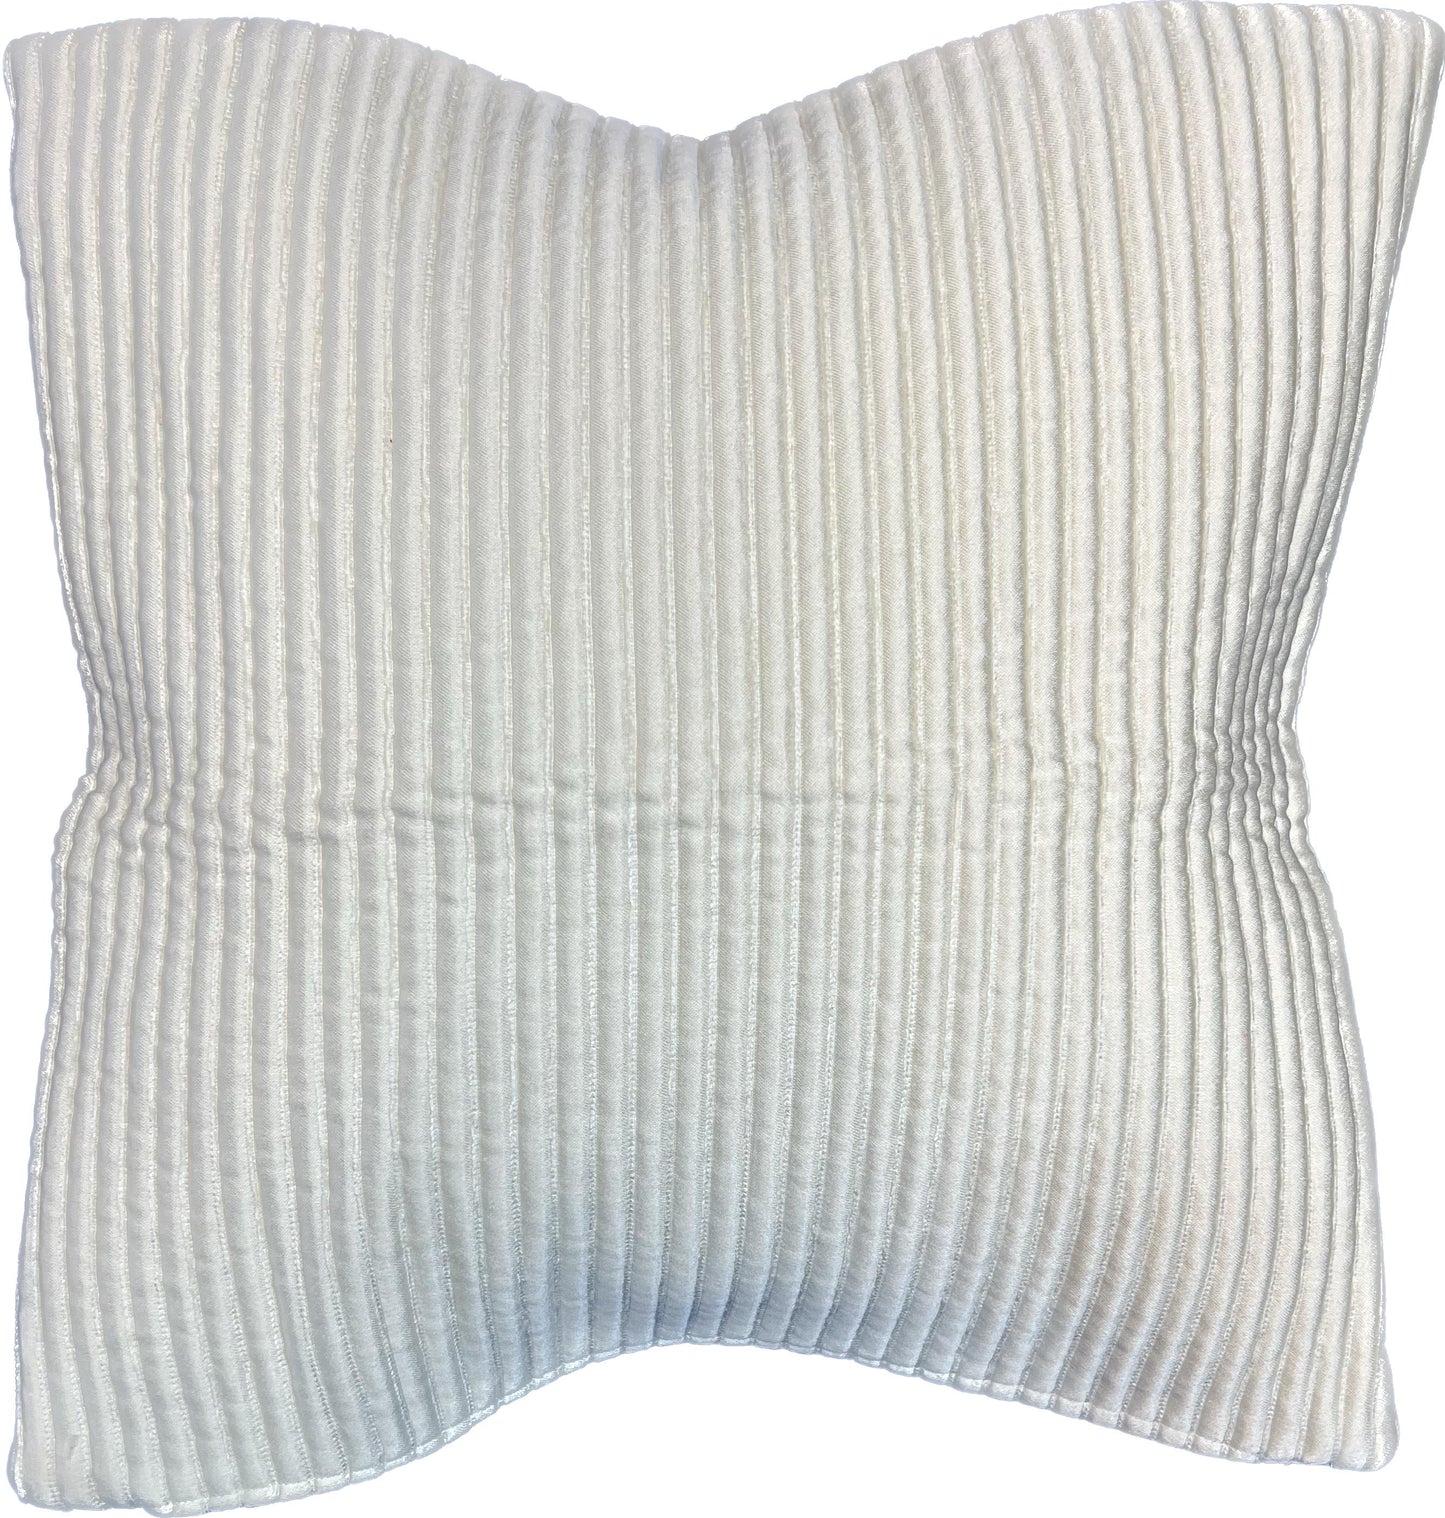 18"x18"  Ribbed Pillow Cover